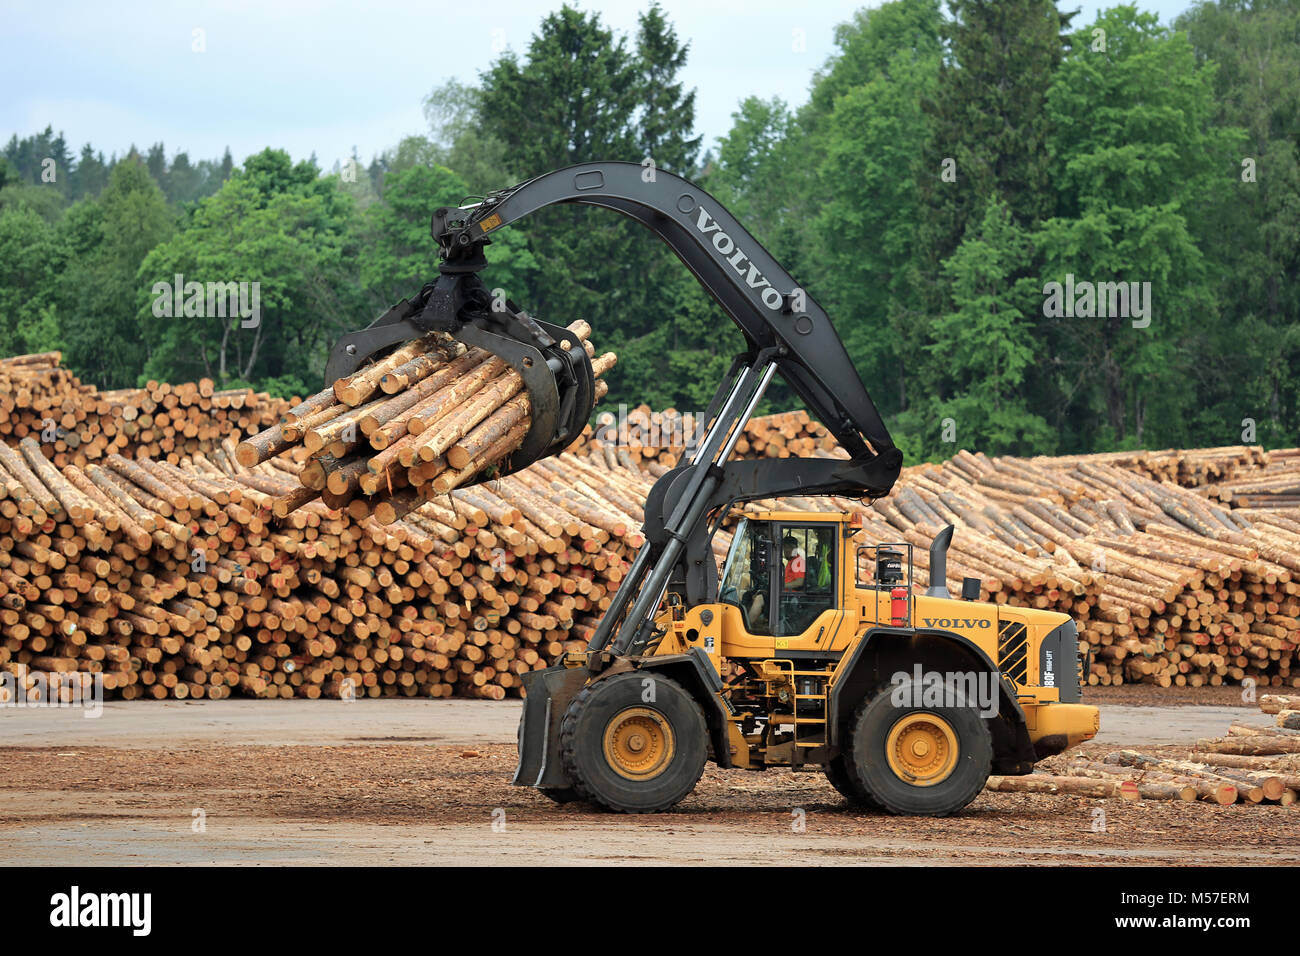 KYRO, FINLAND - JUNE 7, 2014: Volvo L180F High Lift wheel loader working at sawmill lumber yard.  The arm is capable of reaching a lift height of 5.8  Stock Photo